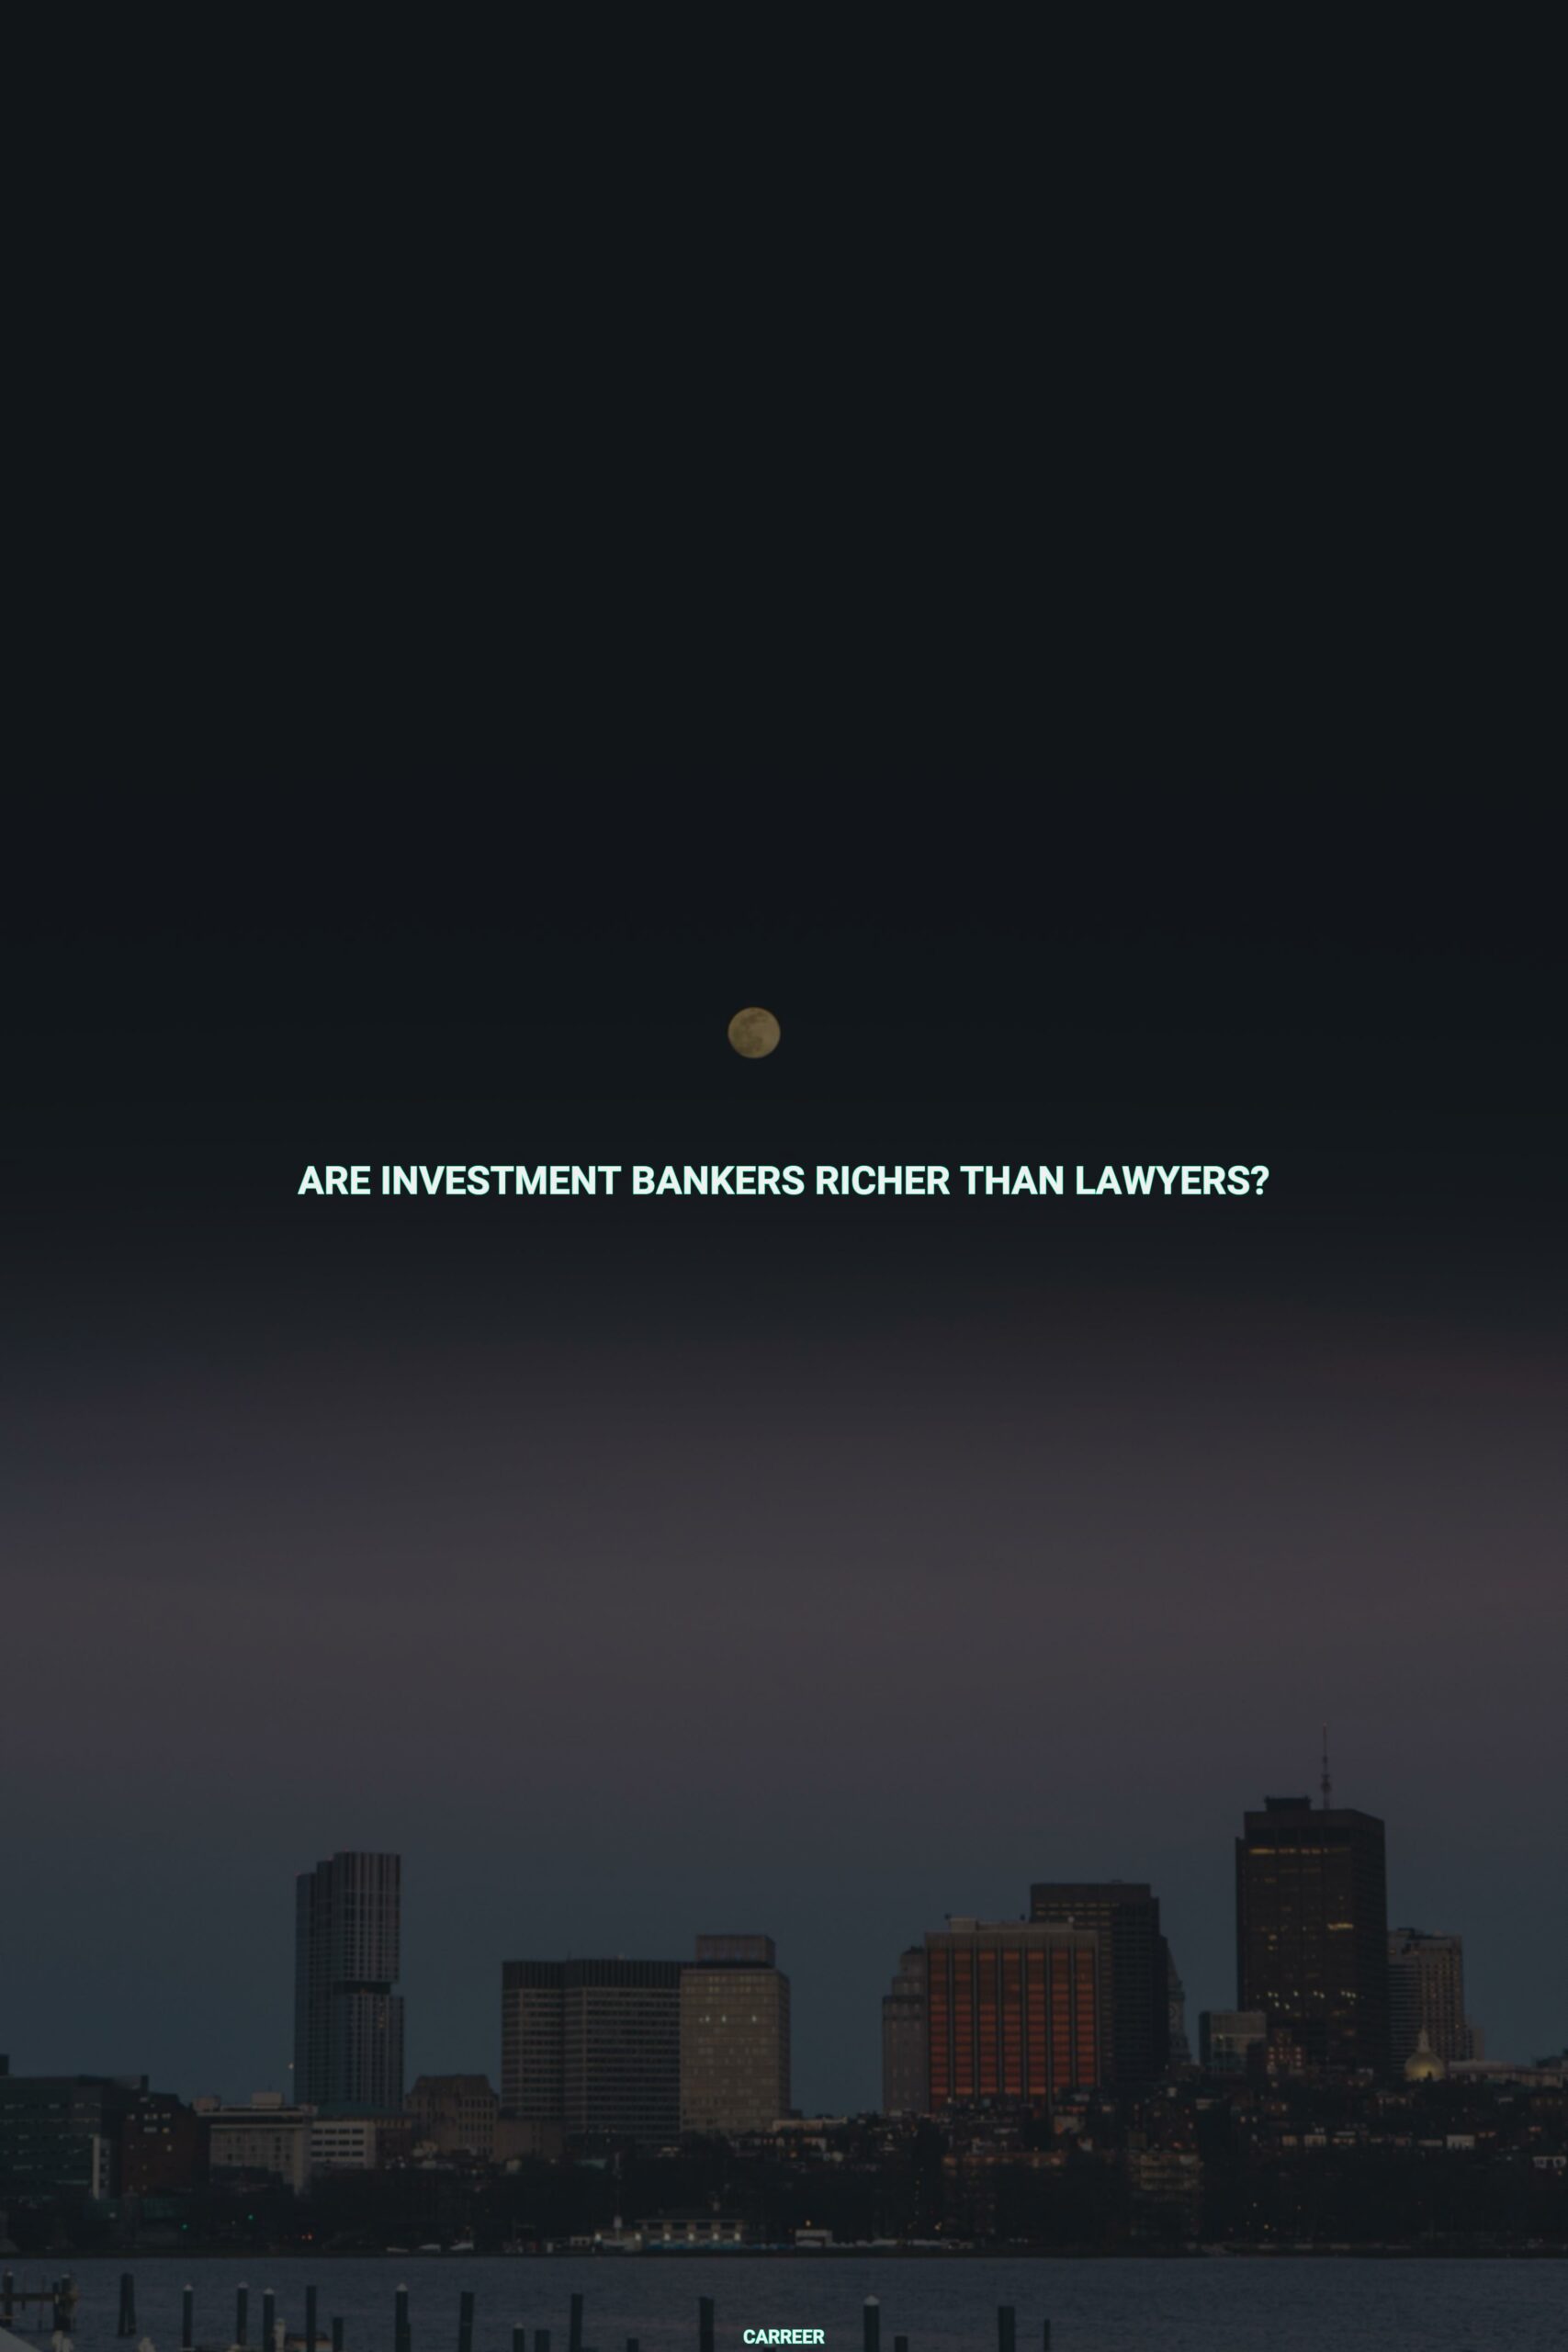 Are investment bankers richer than lawyers?